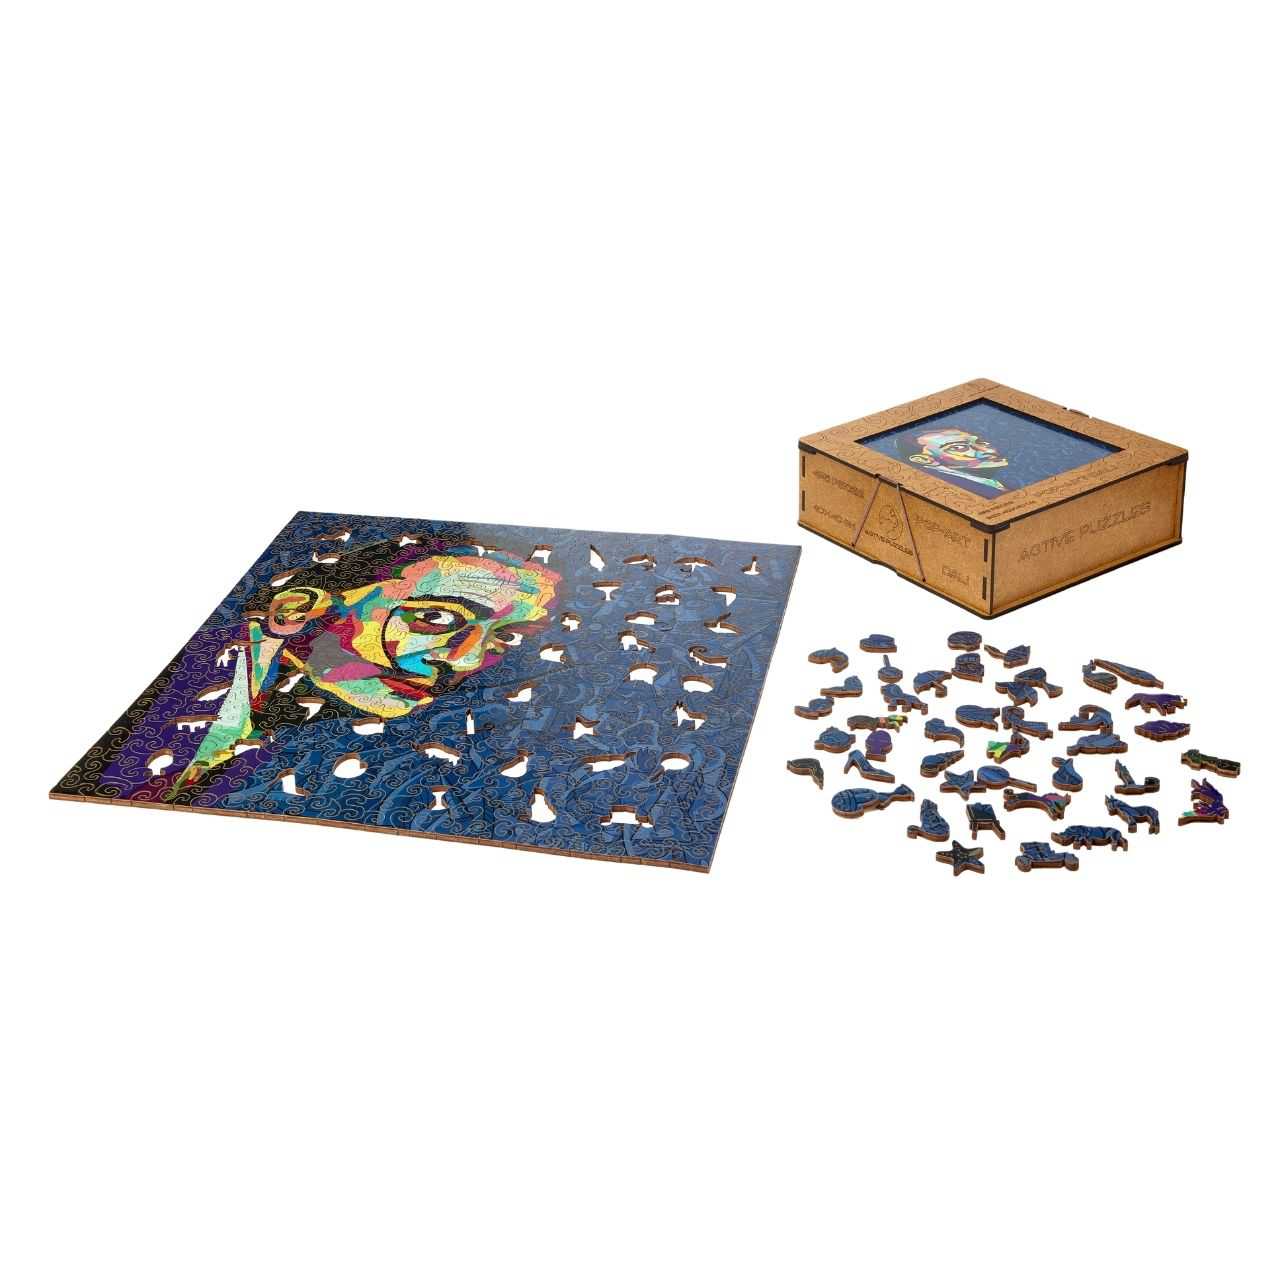 Missing Salvador Dalí wooden puzzles and boxSalvador Dalí wooden puzzle board, box and pieces